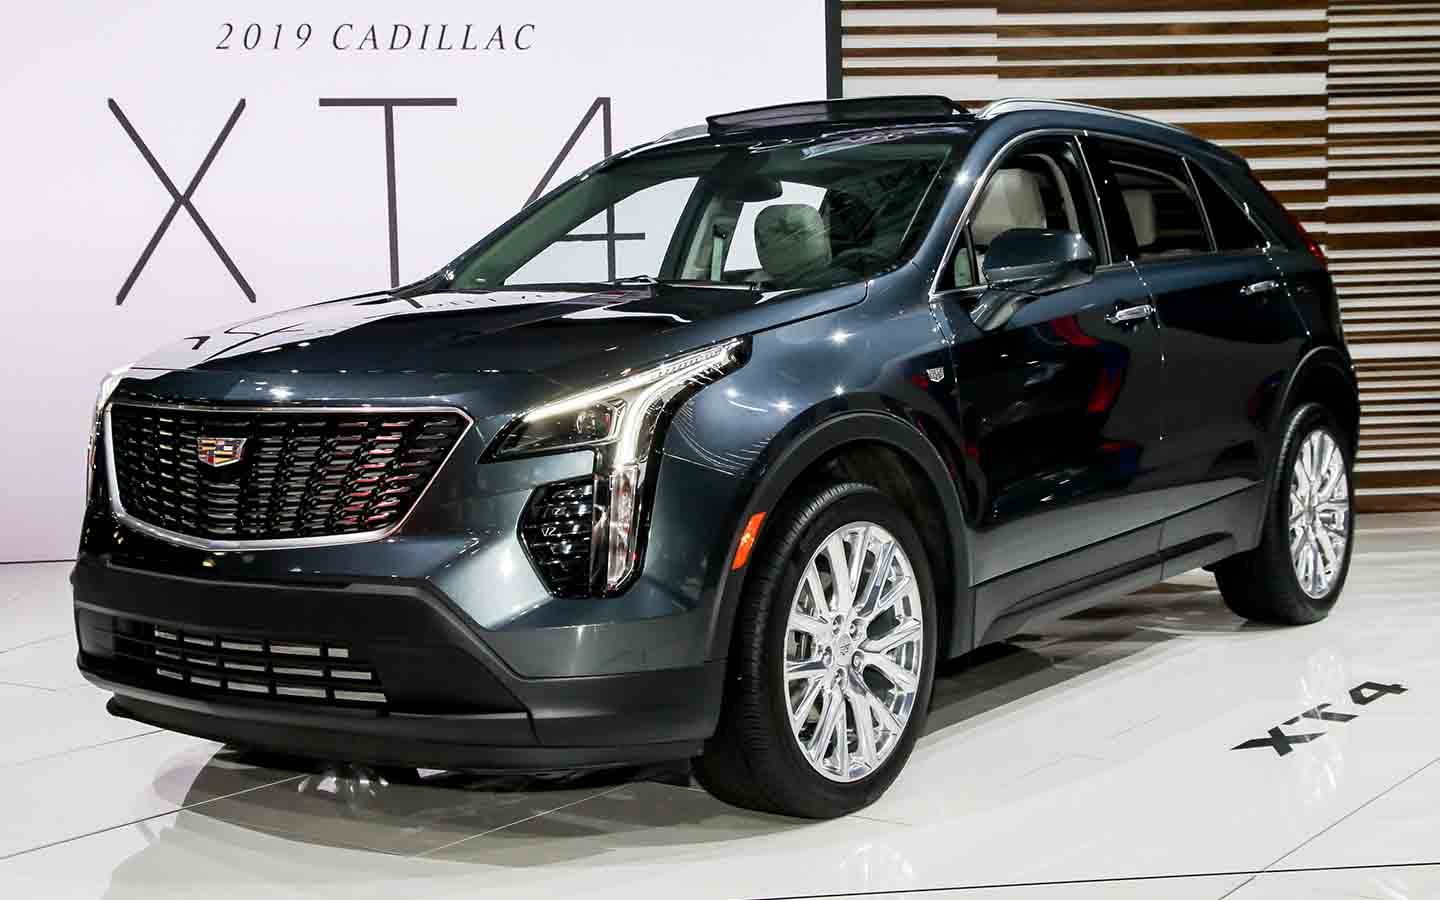 xt4 also makes it to the list of top cadillac used car models in the uae